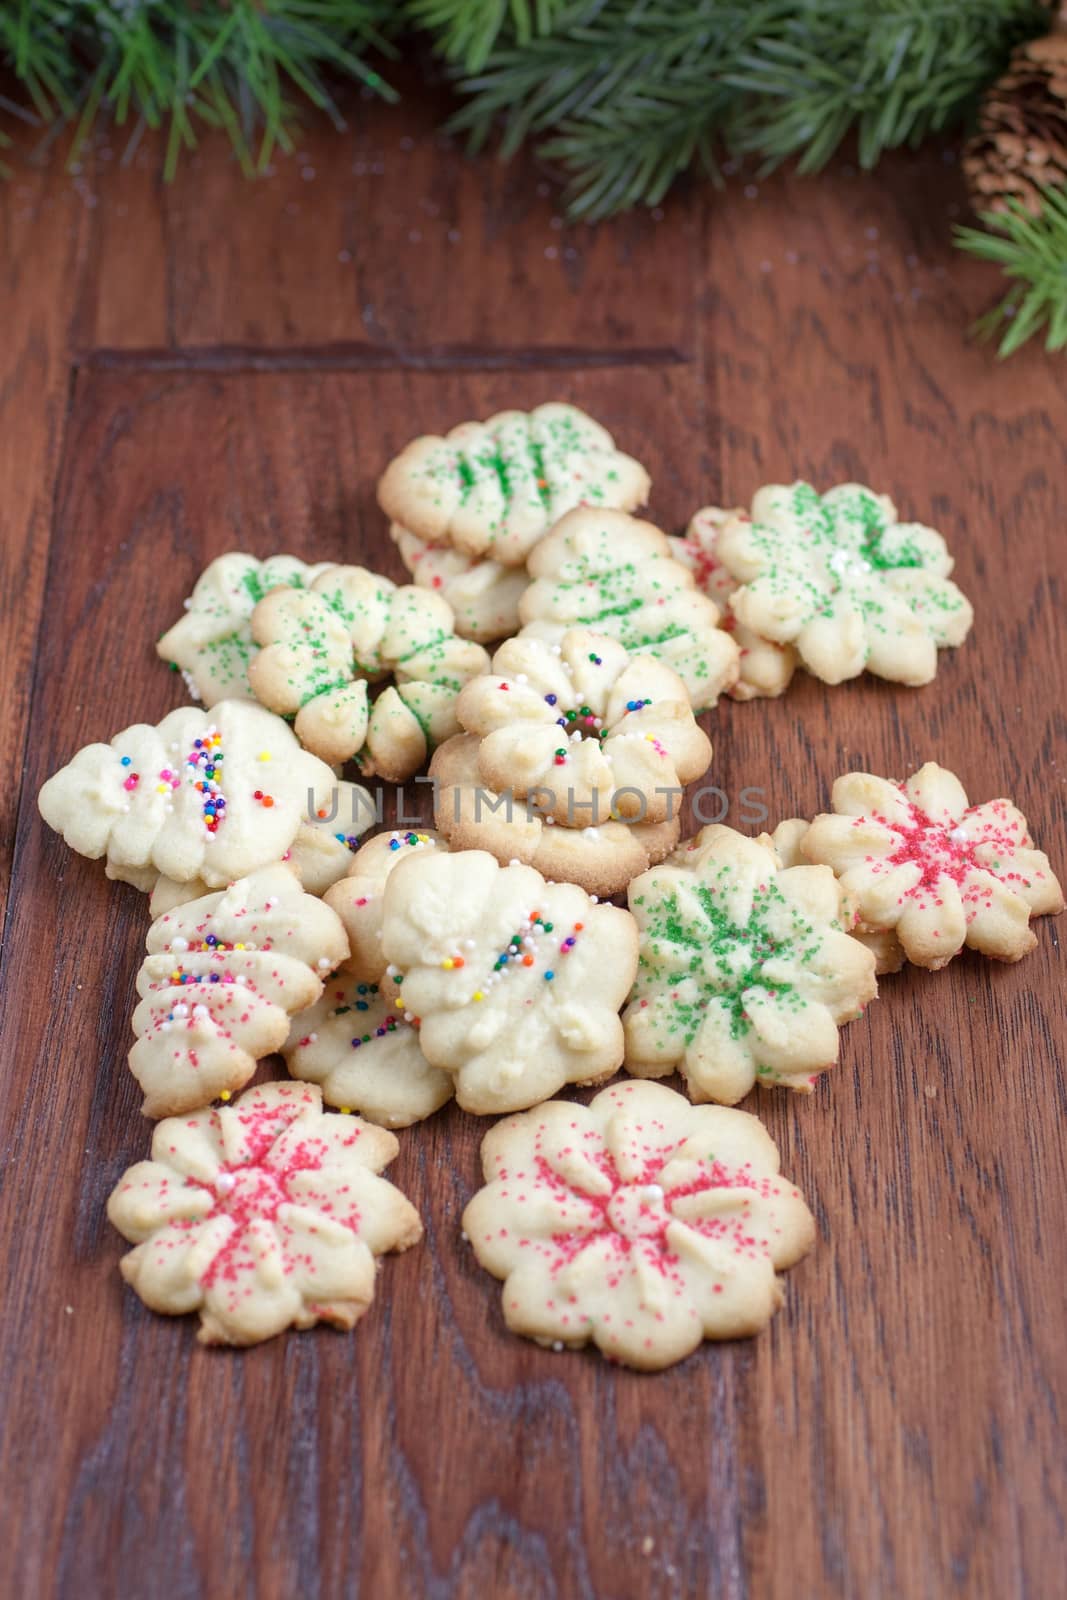 Christmas cookies sitting on a table with some greenery in the background.